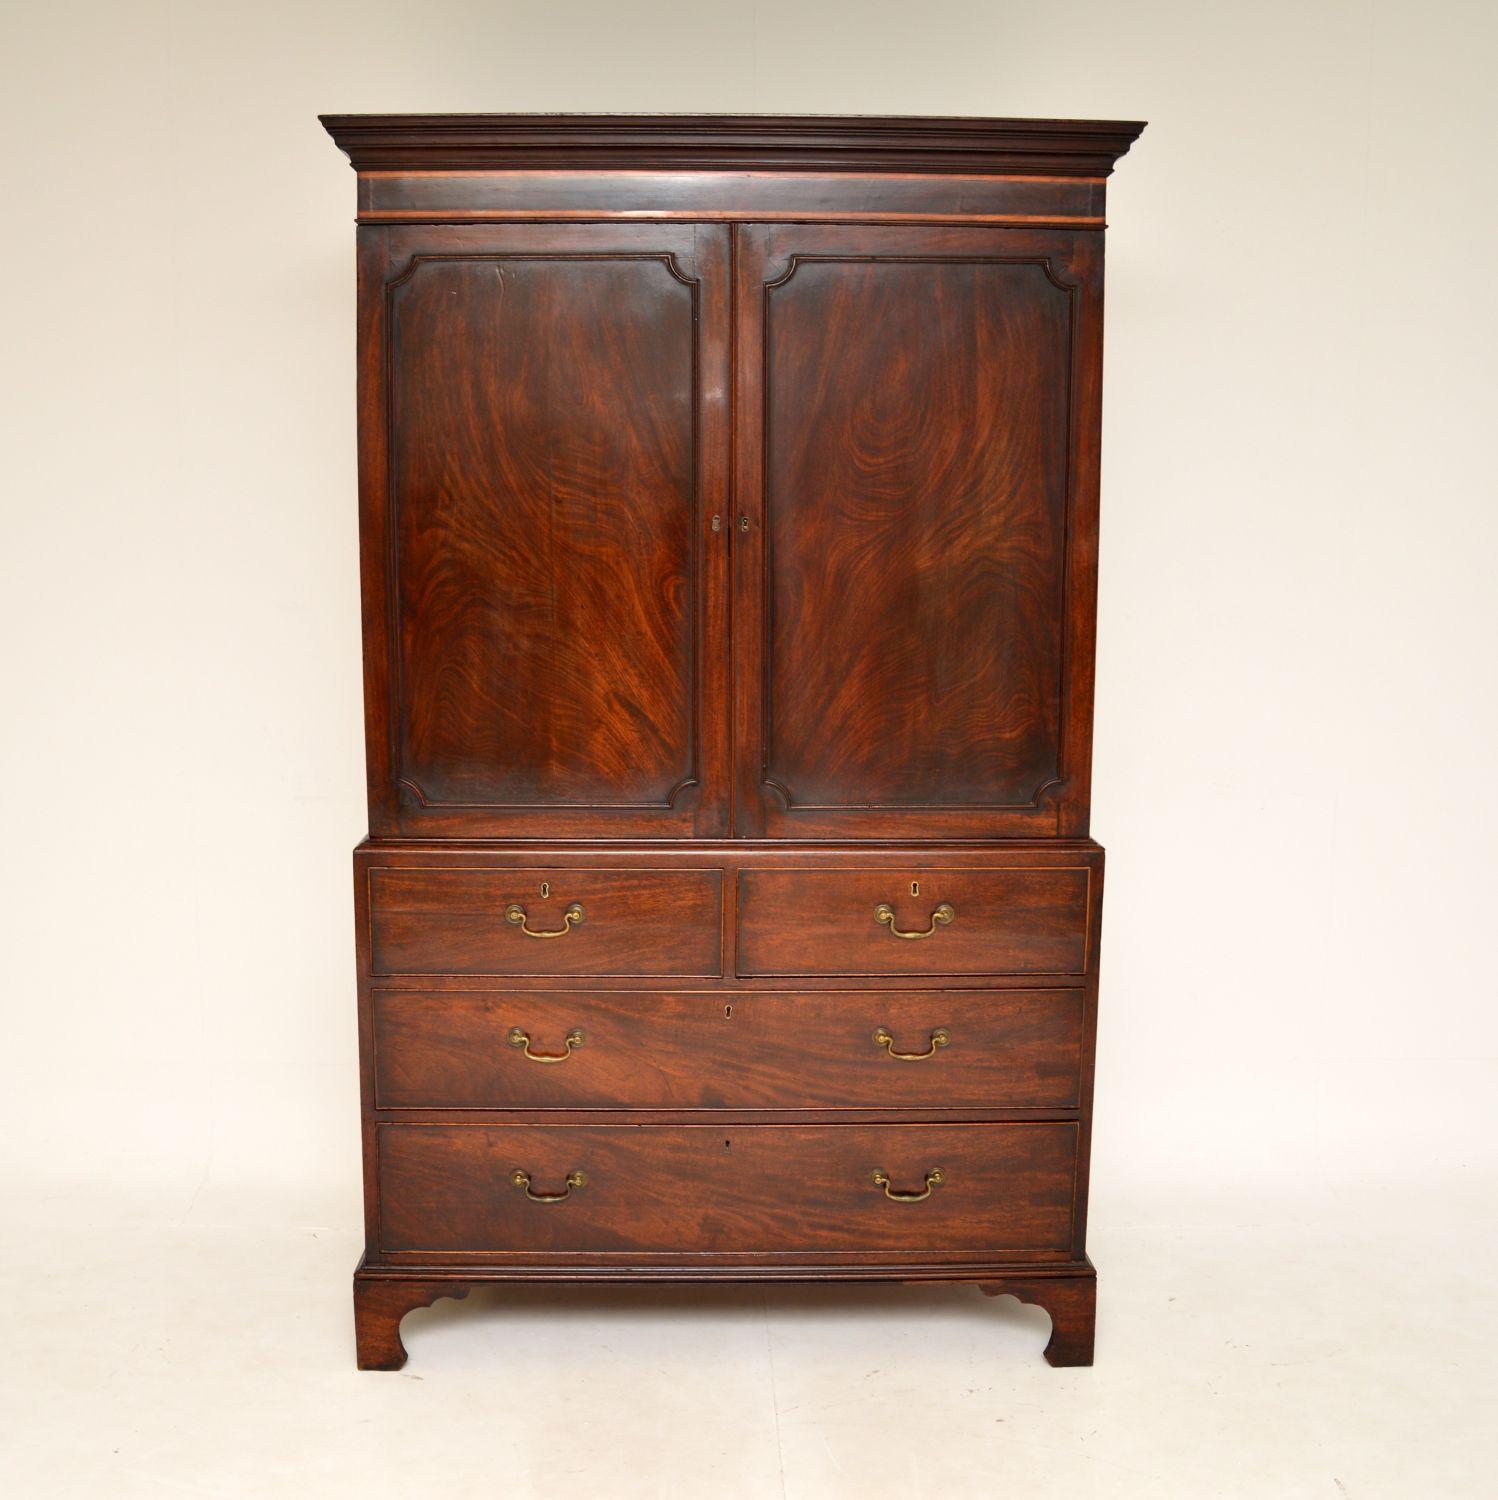 An excellent antique George III period linen press. This was made in England, it dates from around 1790-1810.

The quality is excellent, this is extremely well made and is a great size with lots of storage space. The upper paneled doors contain two